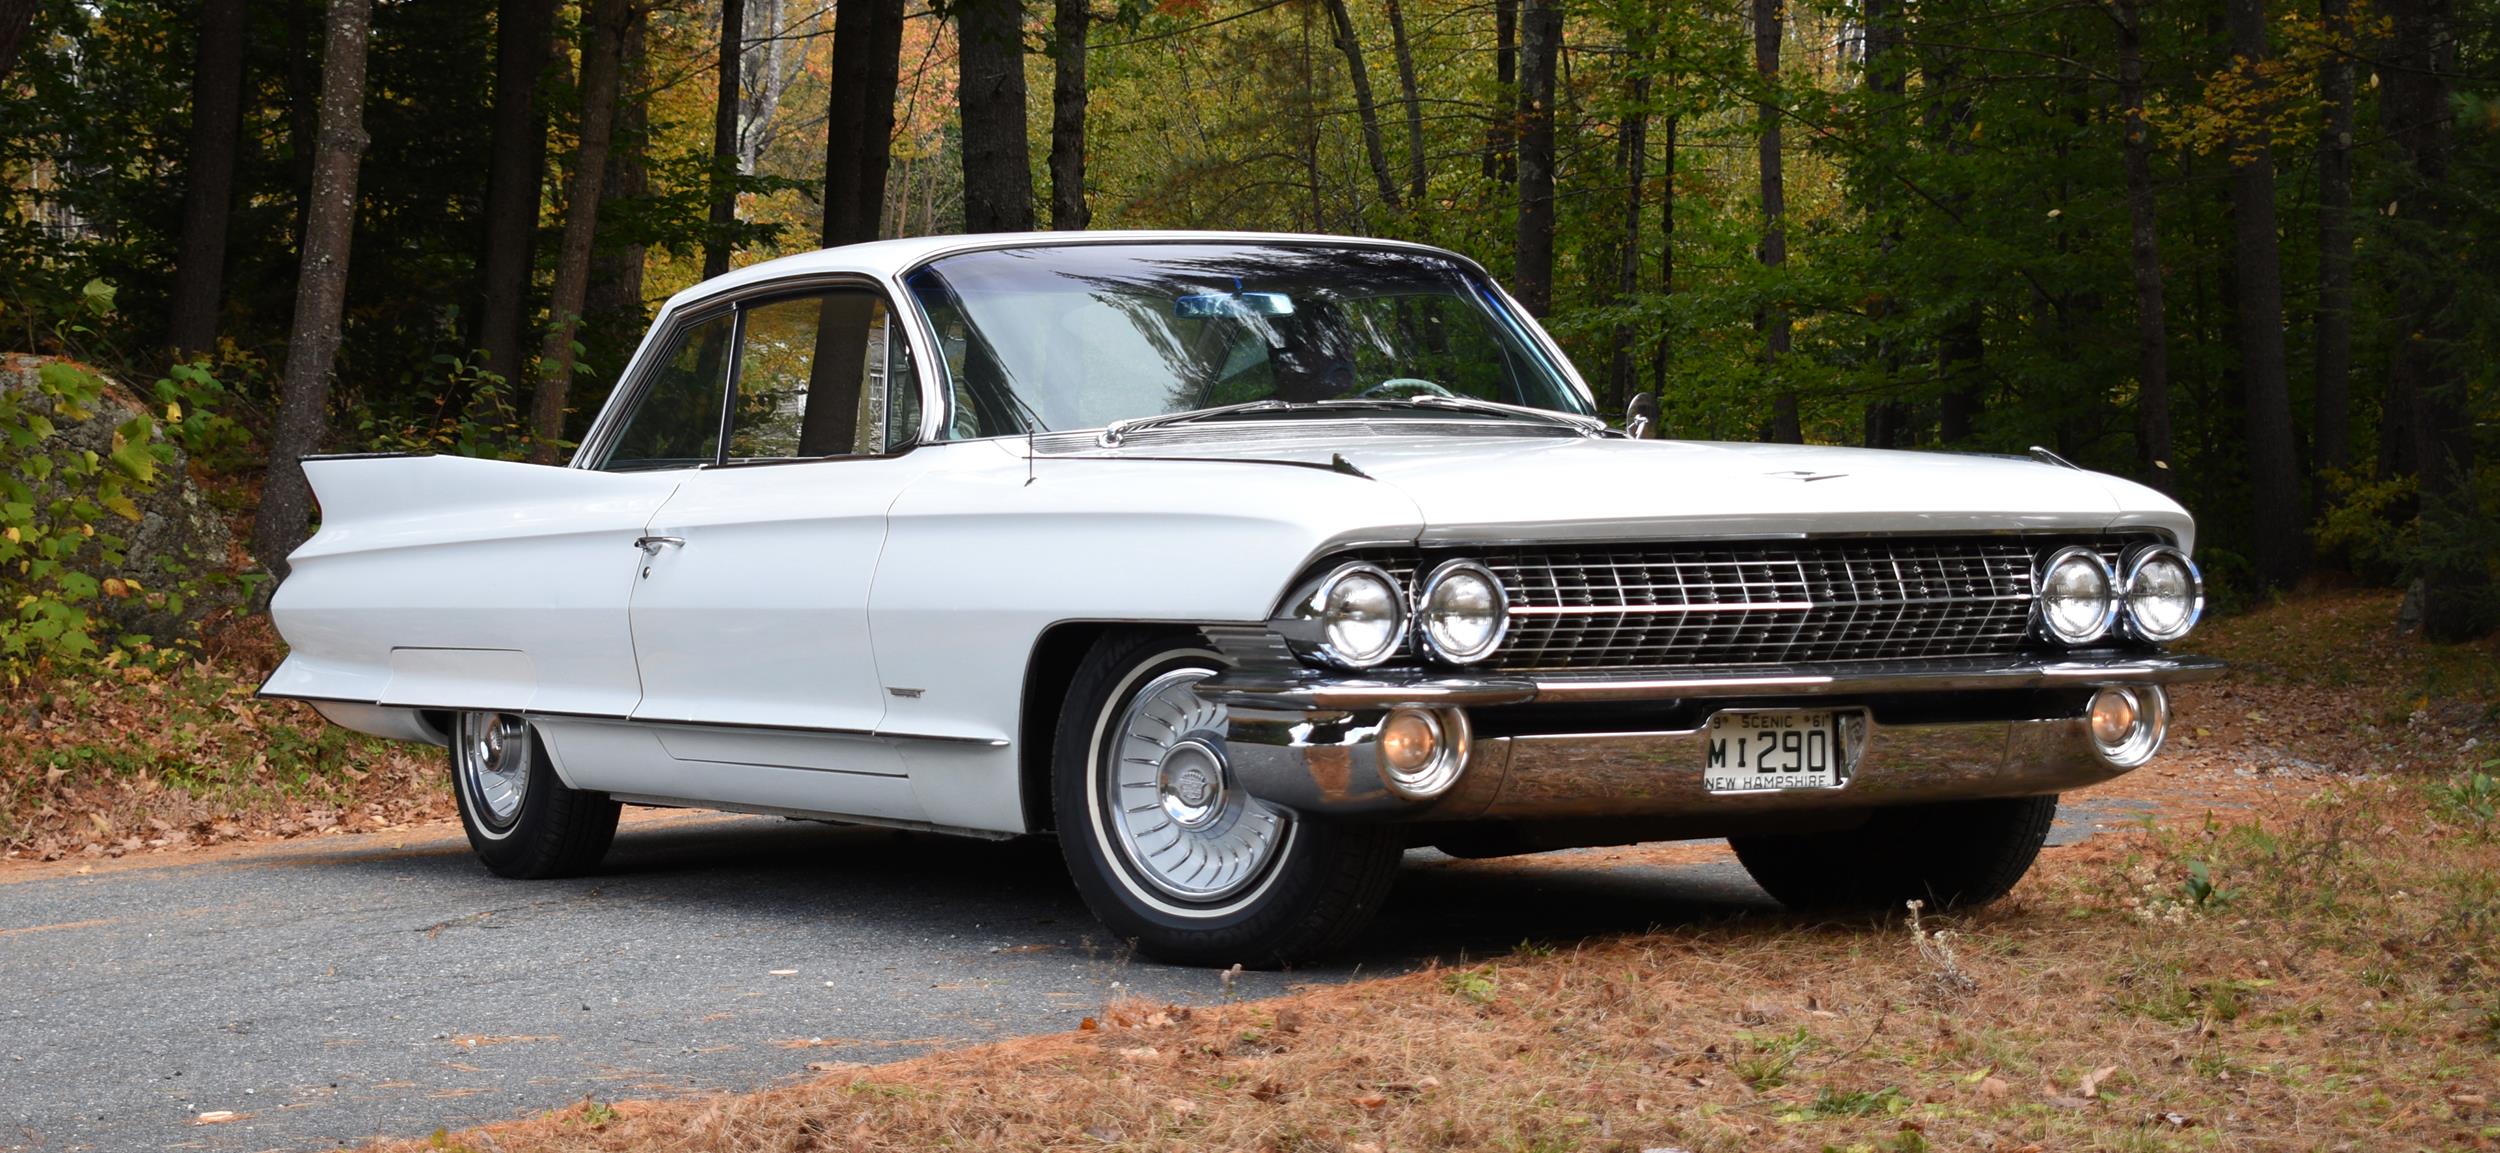 1961 CADILLAC SERIES 62. The seventh